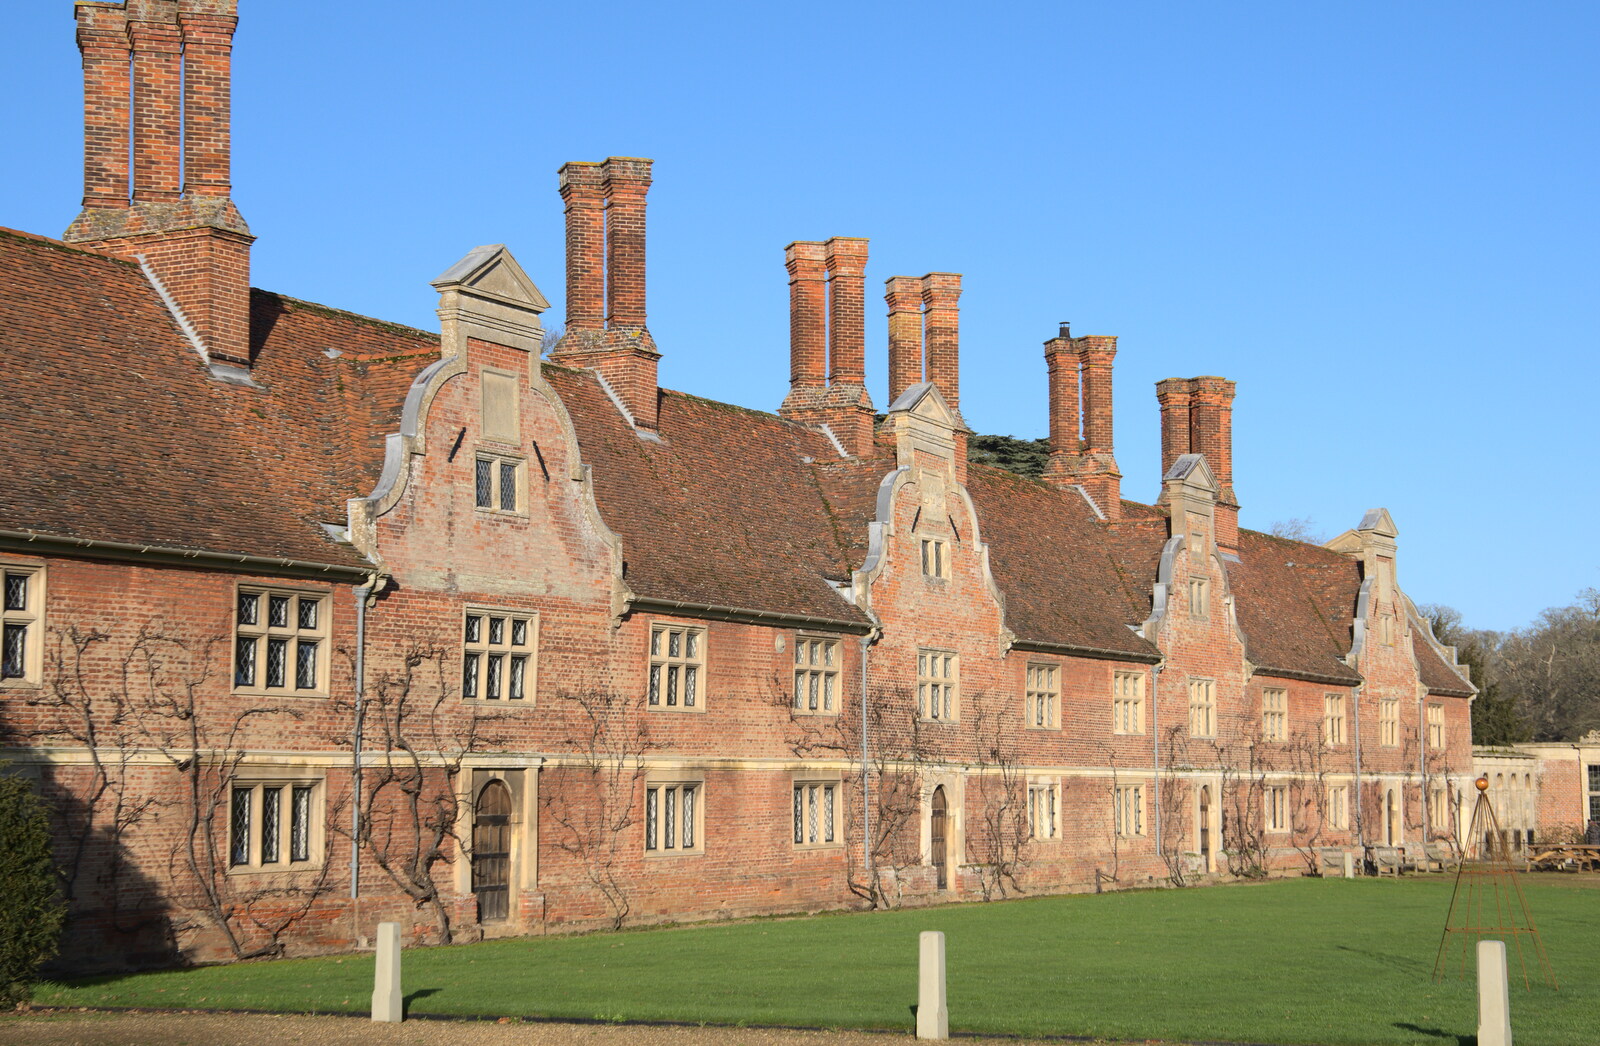 Fancy Alms houses at Blickling Hall from A Visit to Blickling Hall, Aylsham, Norfolk - 9th January 2022